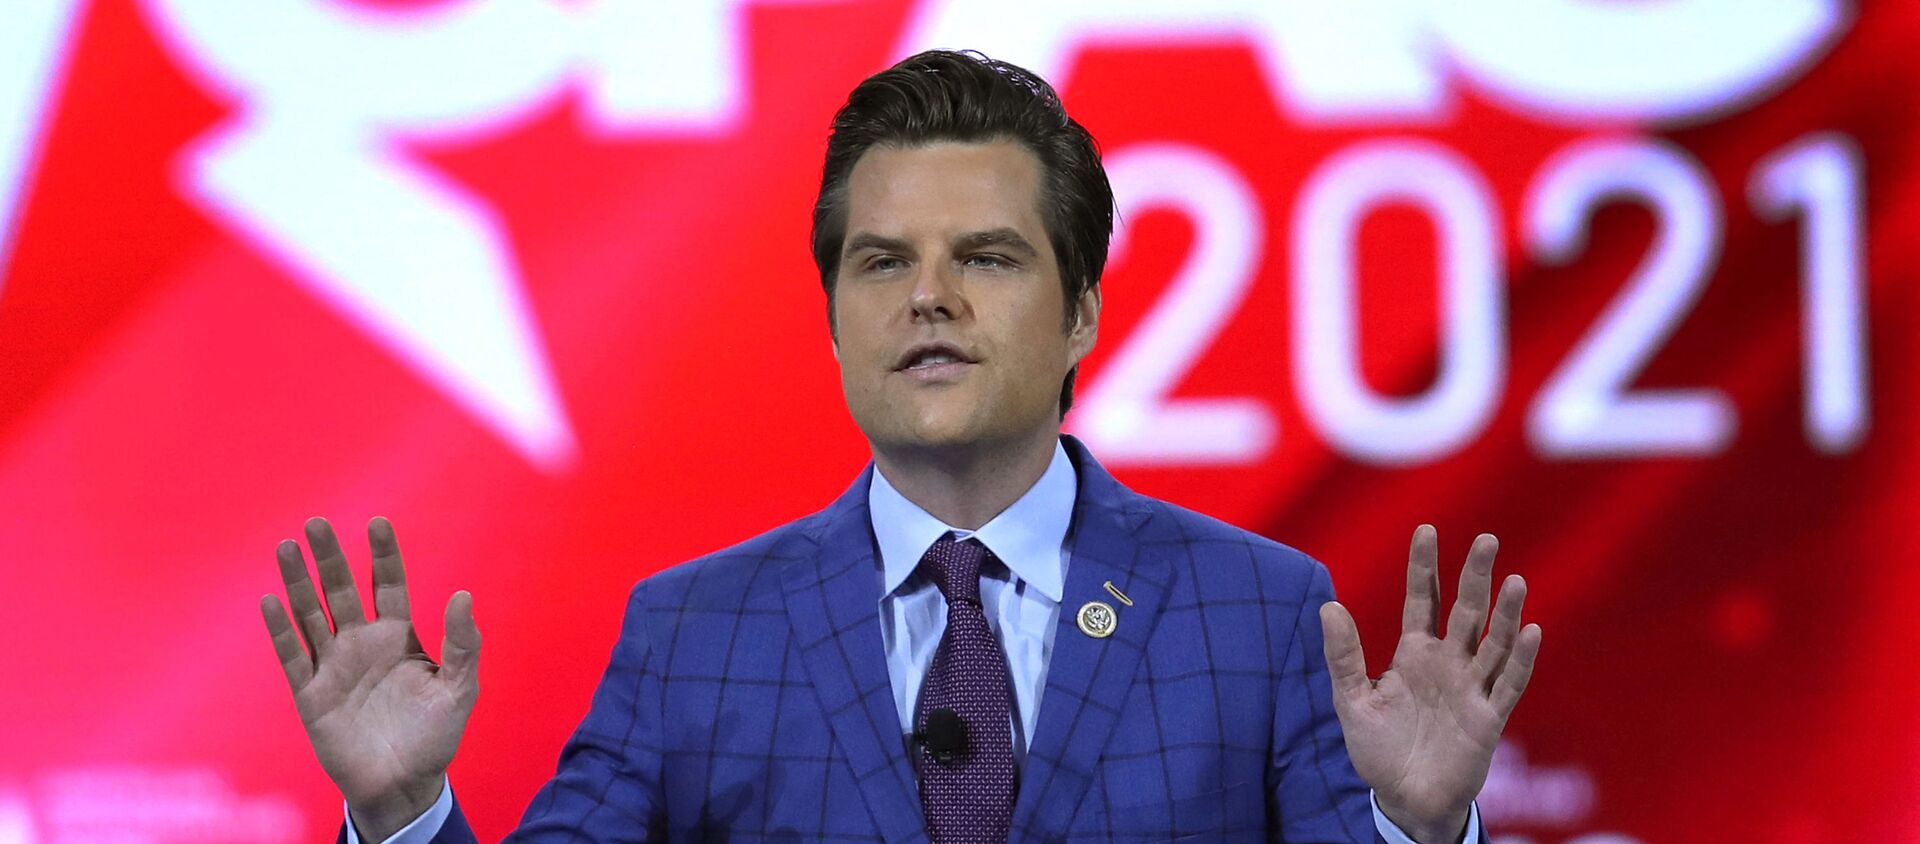 Rep. Matt Gaetz (R-FL) addresses the Conservative Political Action Conference being held in the Hyatt Regency on February 26, 2021 in Orlando, Florida.  Joe Raedle/Getty Images/AFP (Photo by JOE RAEDLE / GETTY IMAGES NORTH AMERICA / Getty Images via AFP) - Sputnik International, 1920, 10.04.2021